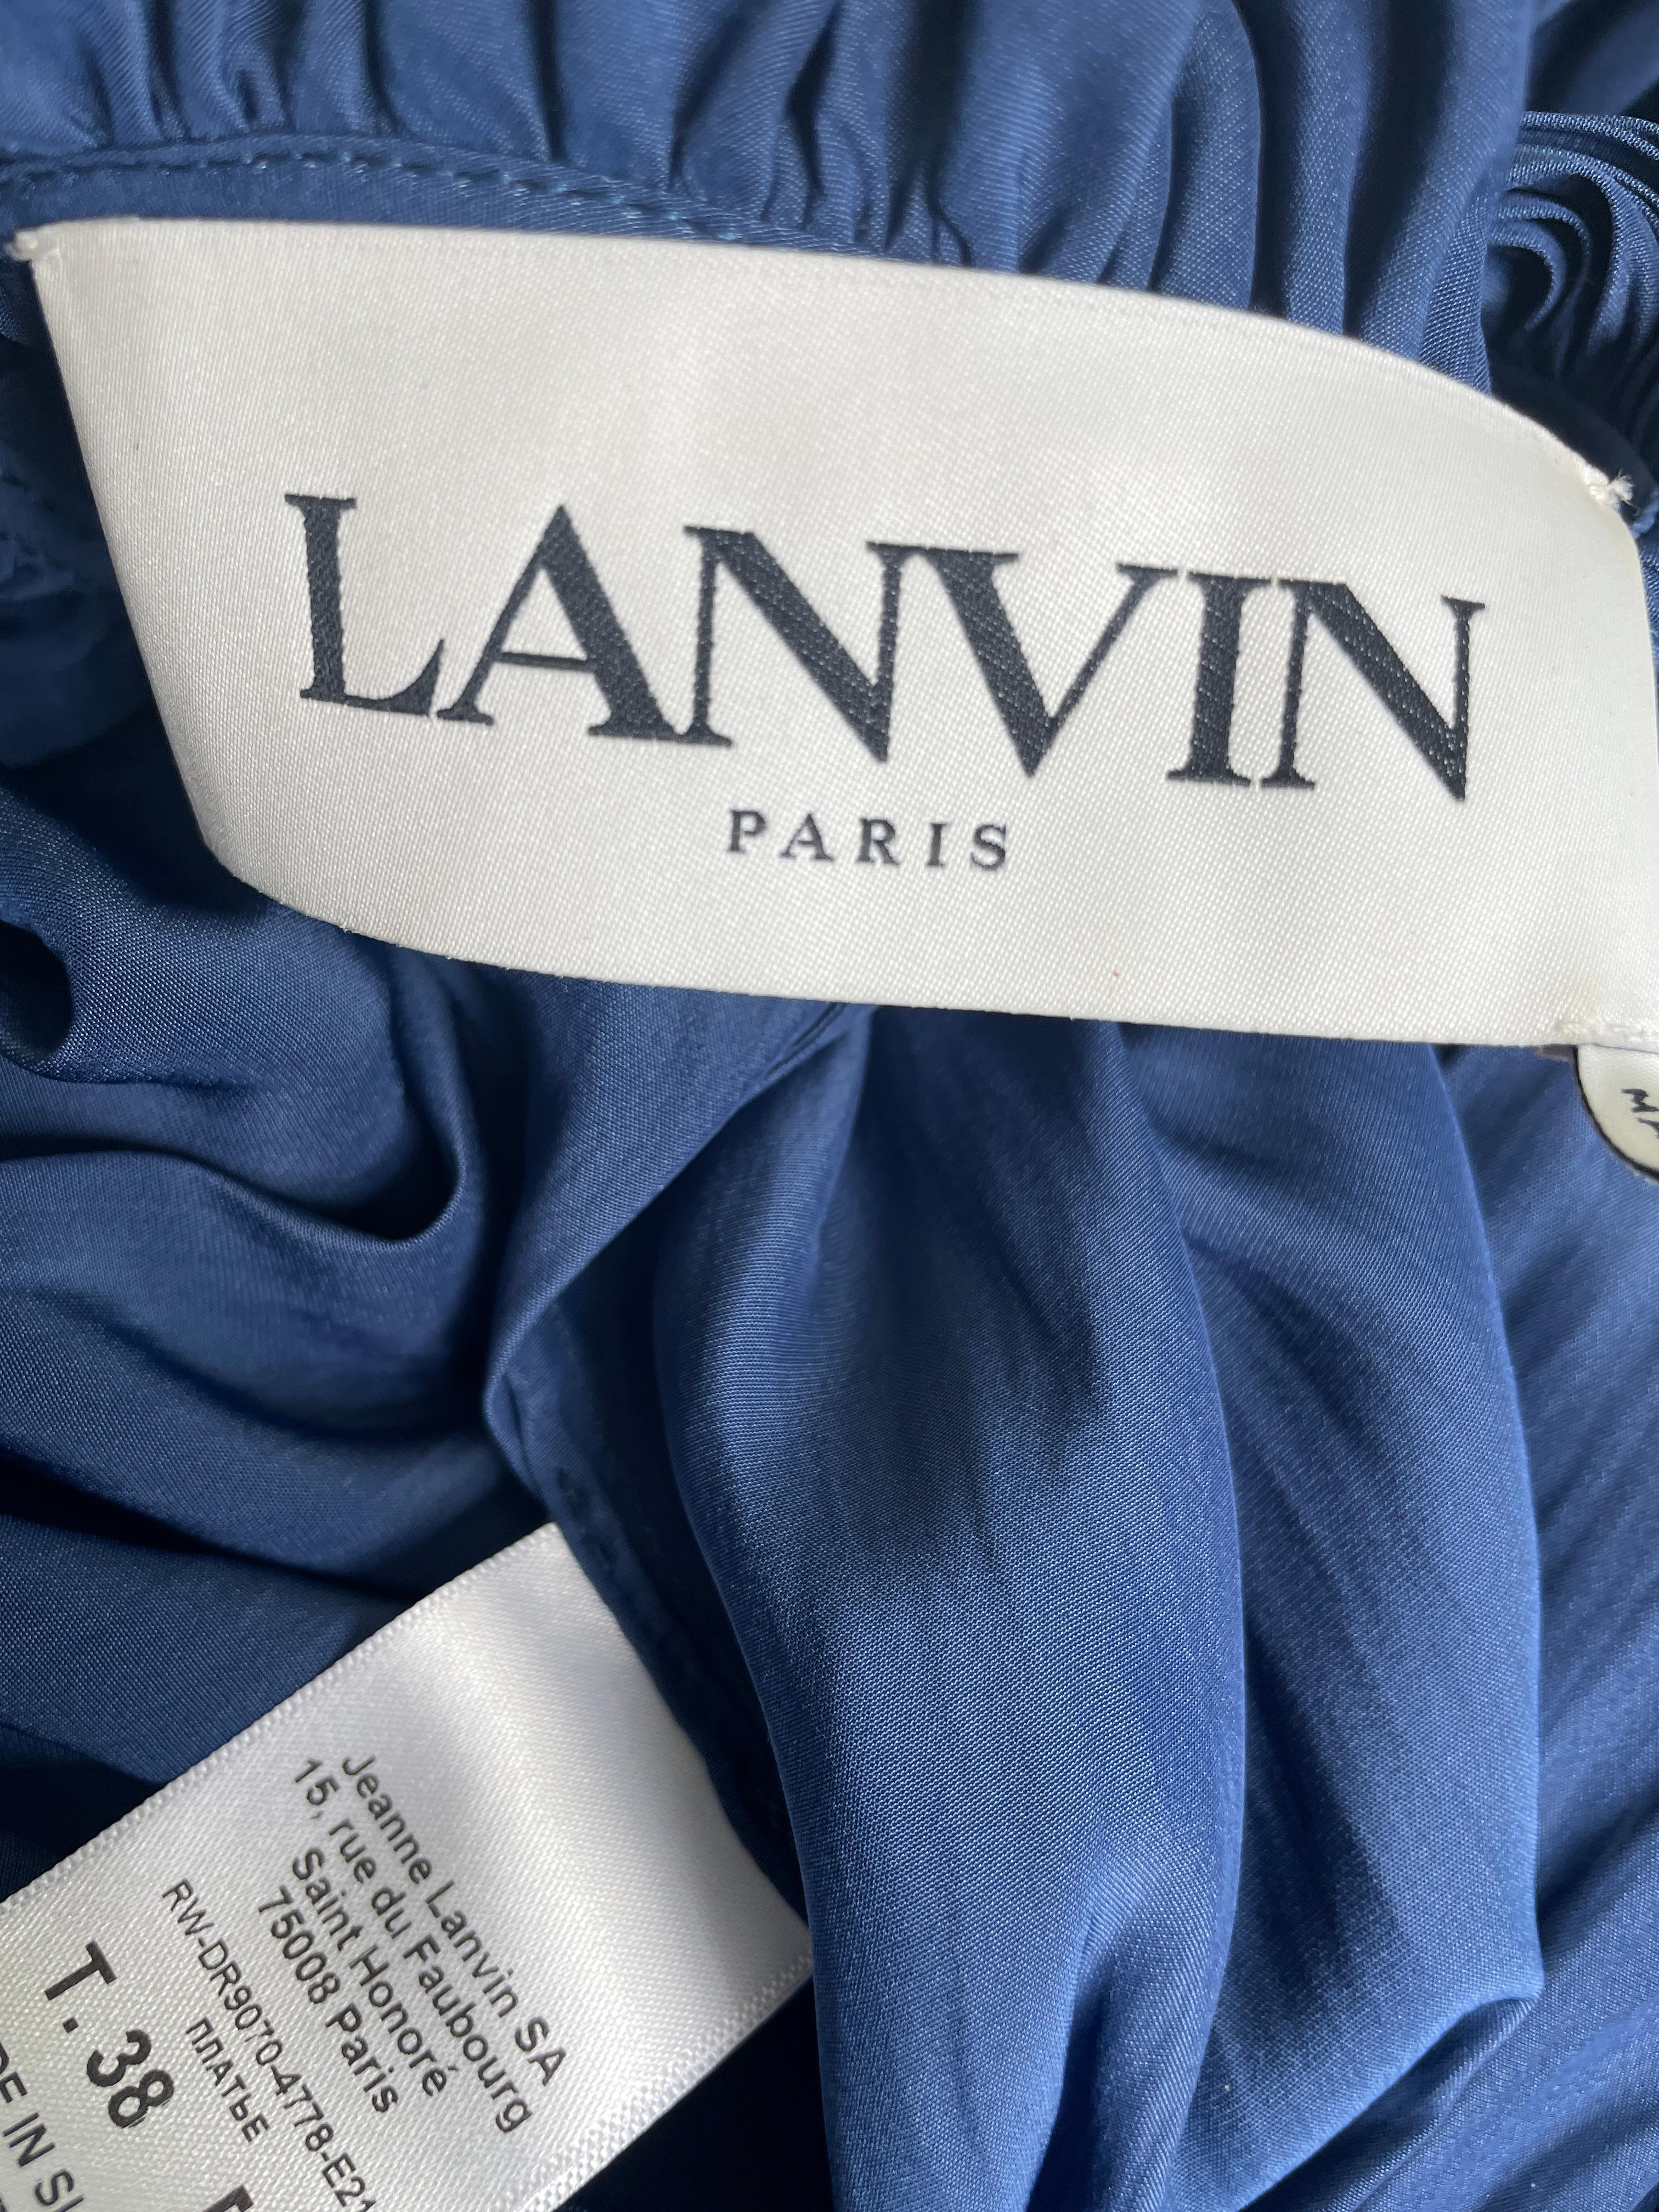 Lanvin by Alber Elbaz Voluminous Navy Blue Pleated Embellished Cocktail Dress  For Sale 7